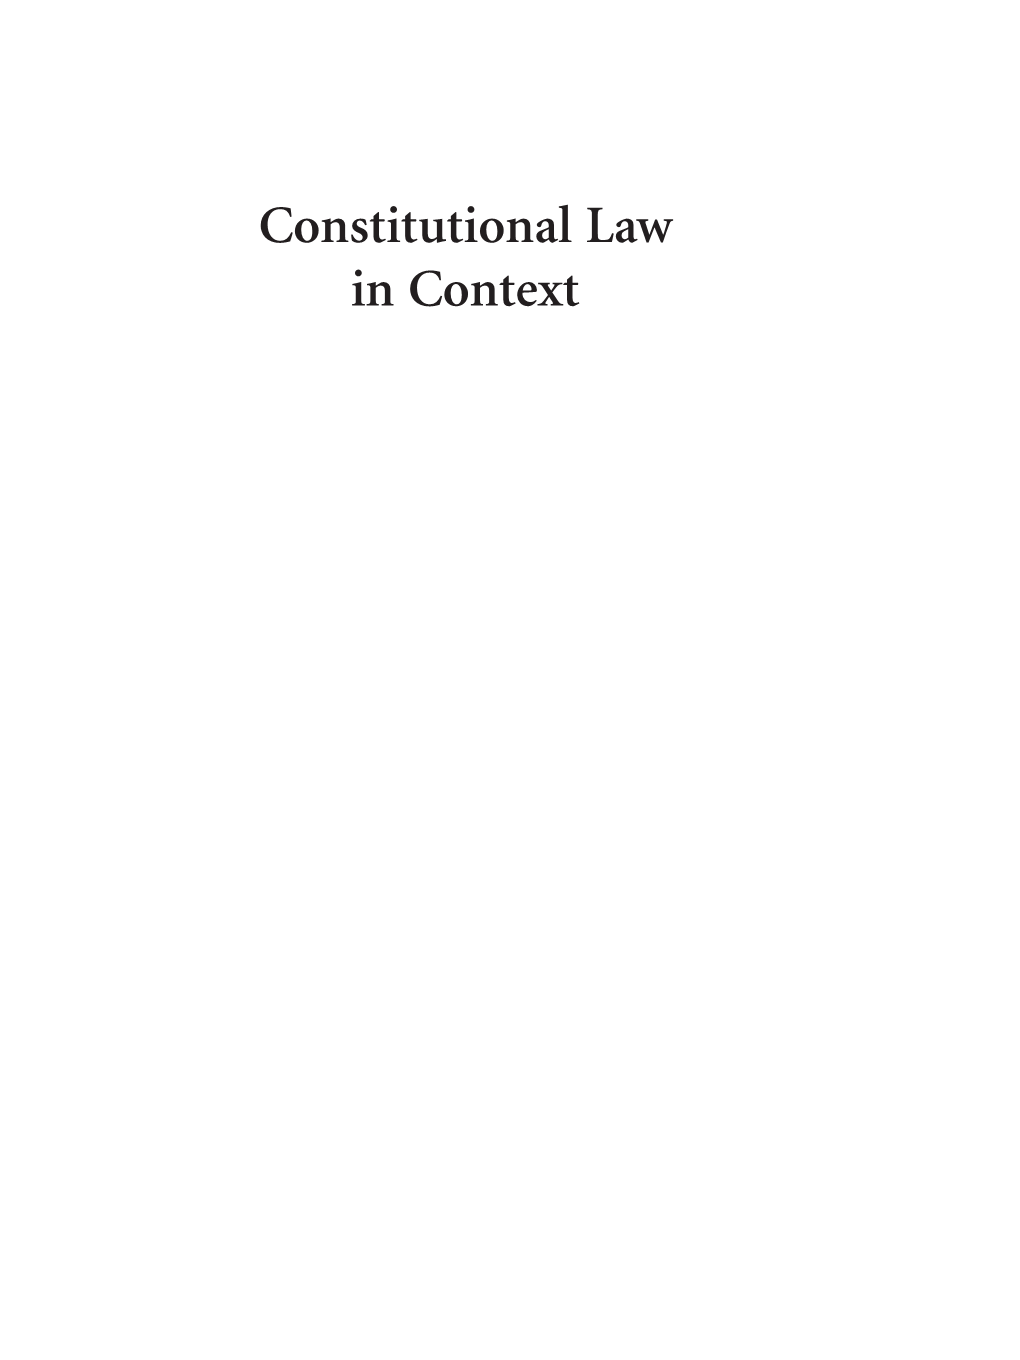 Constitutional Law in Context Curtis Et Al 4E 00A Fmt.Qxp 1/22/18 12:52 PM Page Ii Curtis Et Al 4E 00A Fmt.Qxp 1/22/18 12:52 PM Page Iii